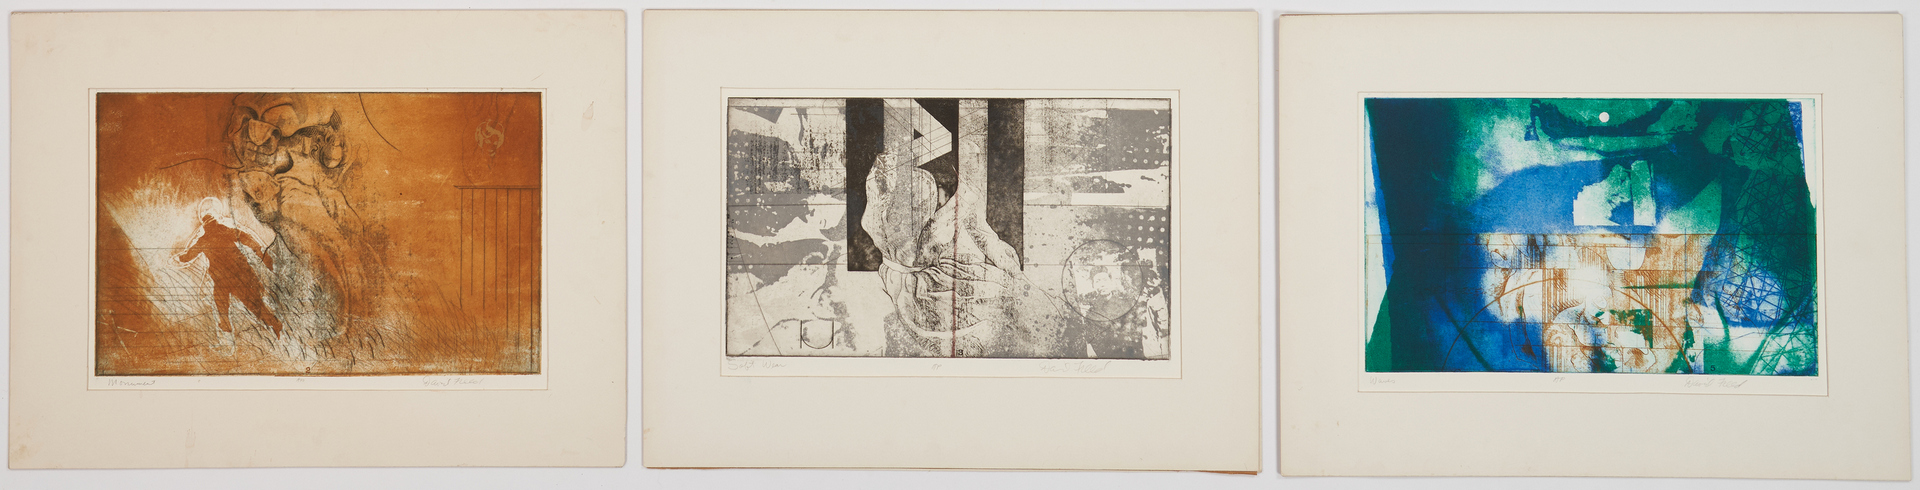 Lot 904: 7 David Freed Artist Proof Color Etchings